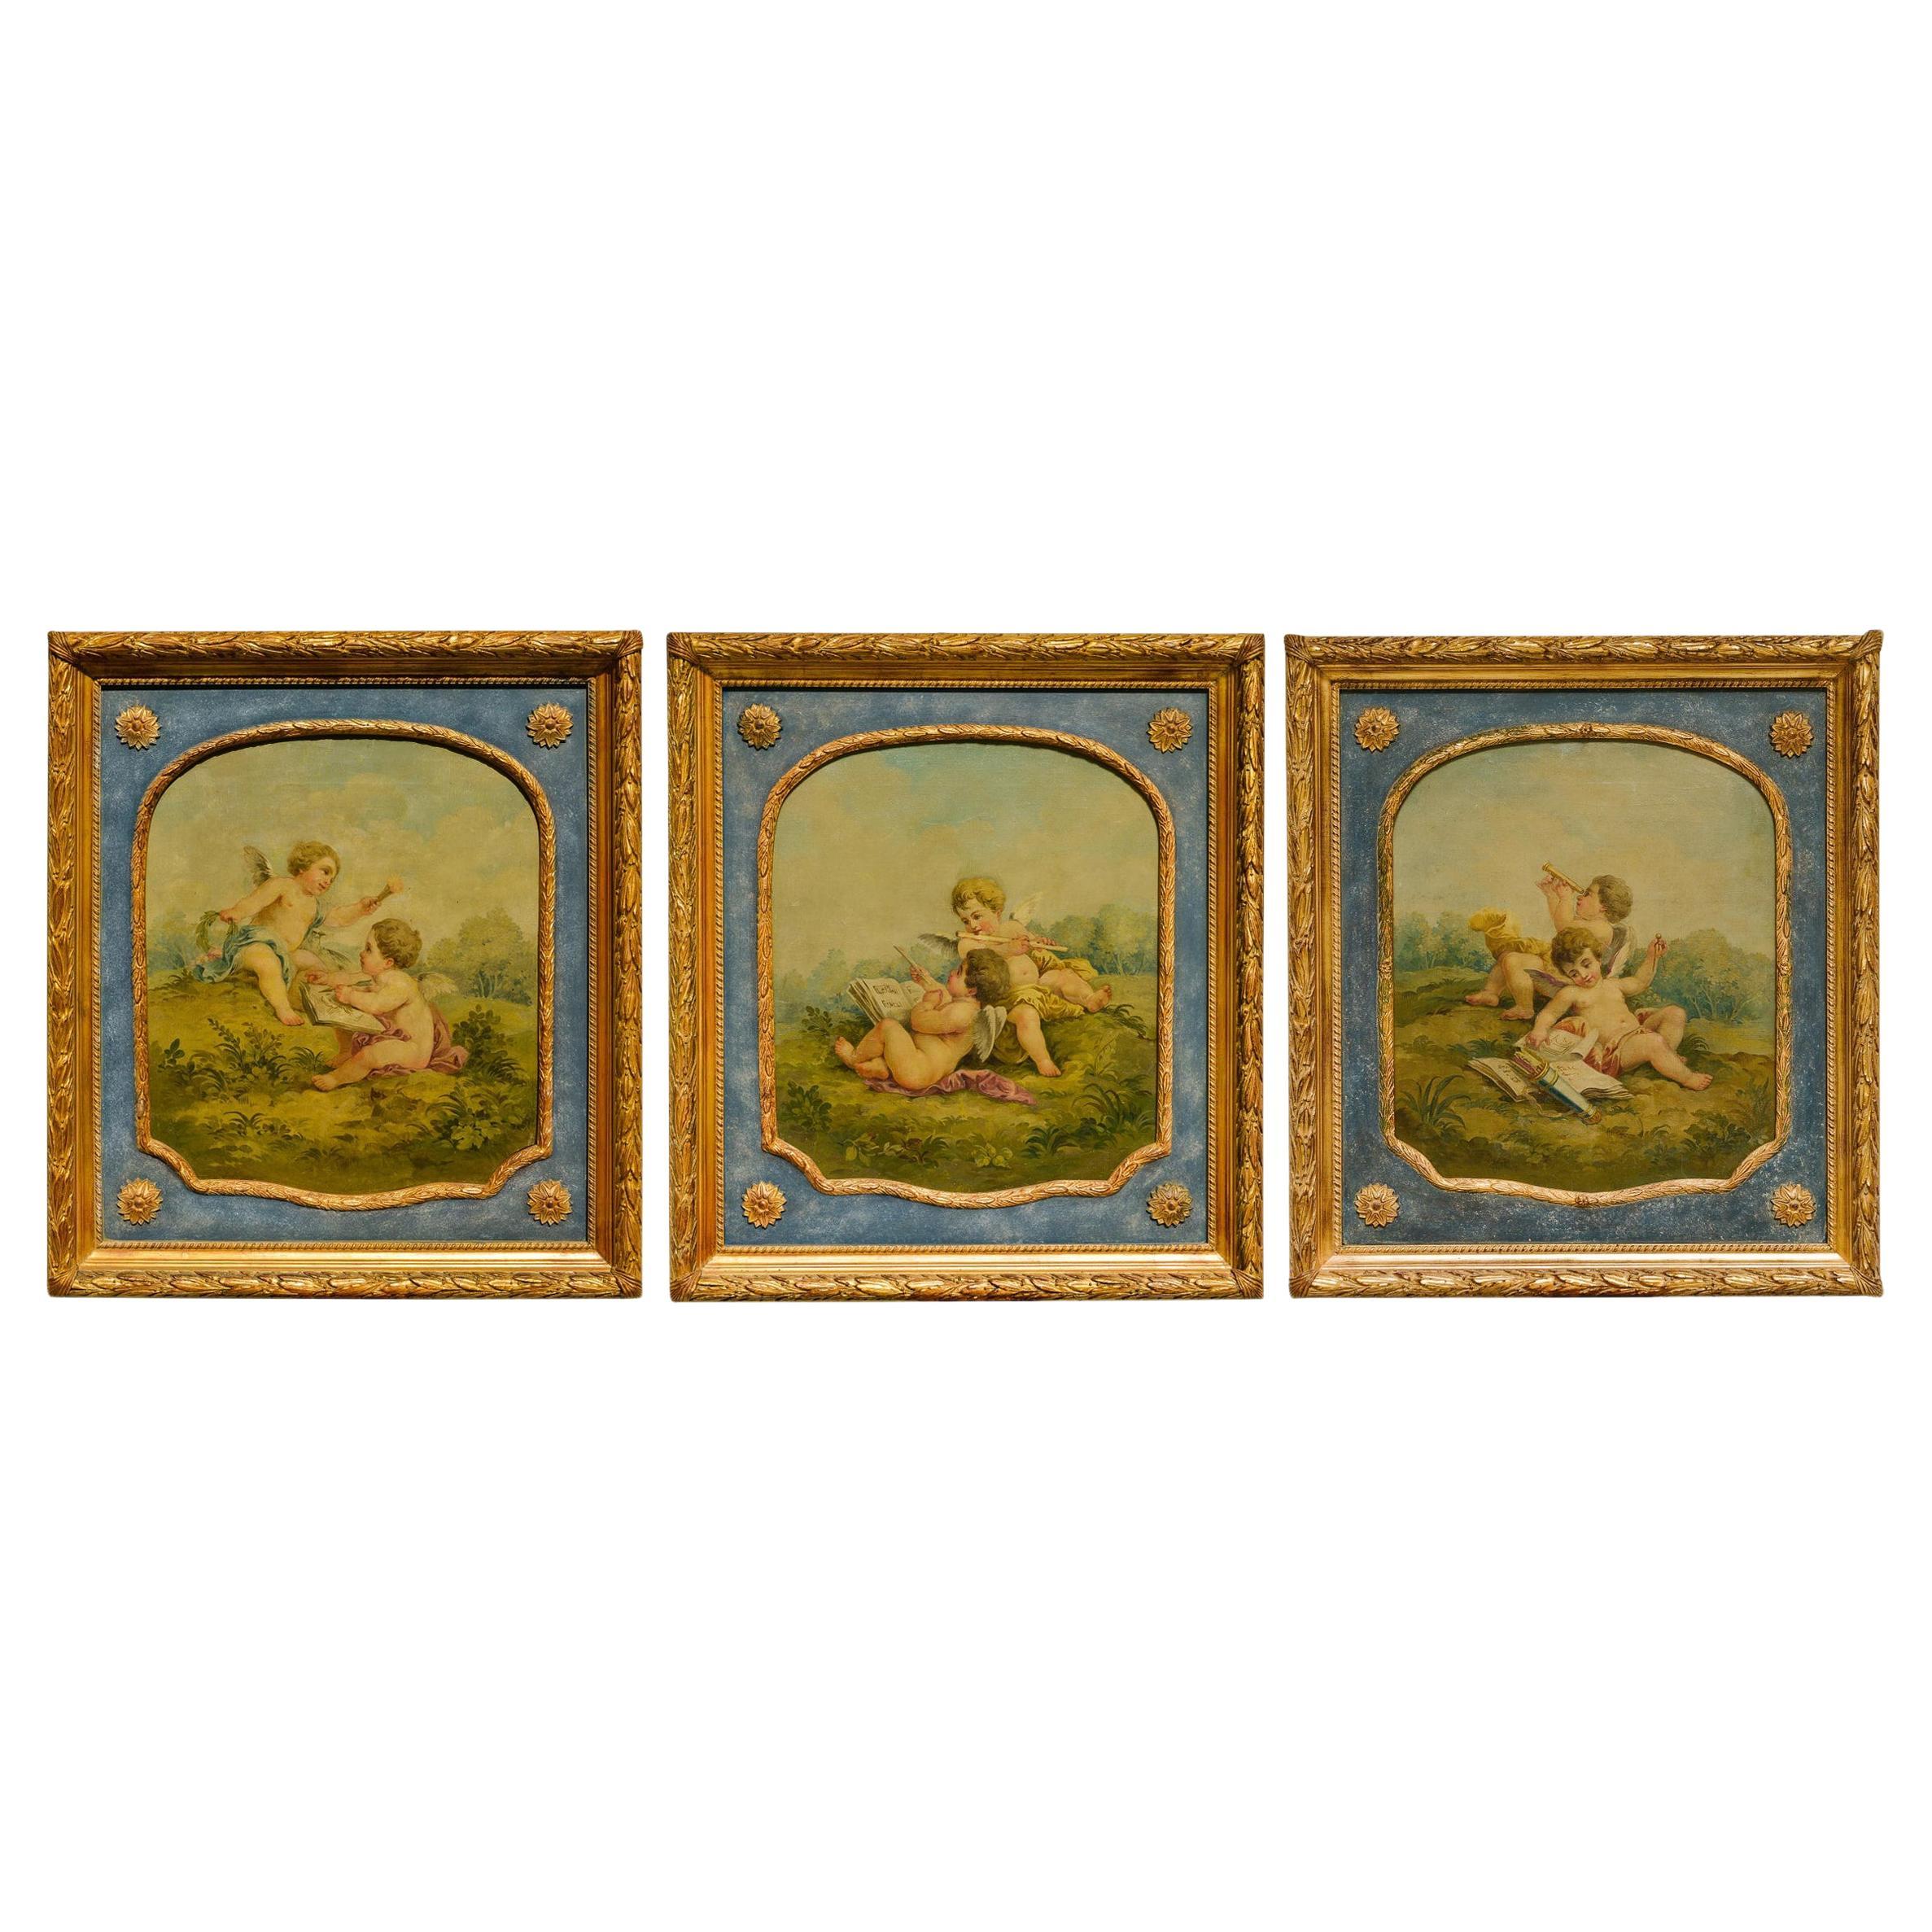 Rare Set of Three Paintings with Putti from Aubusson Tapestry School 